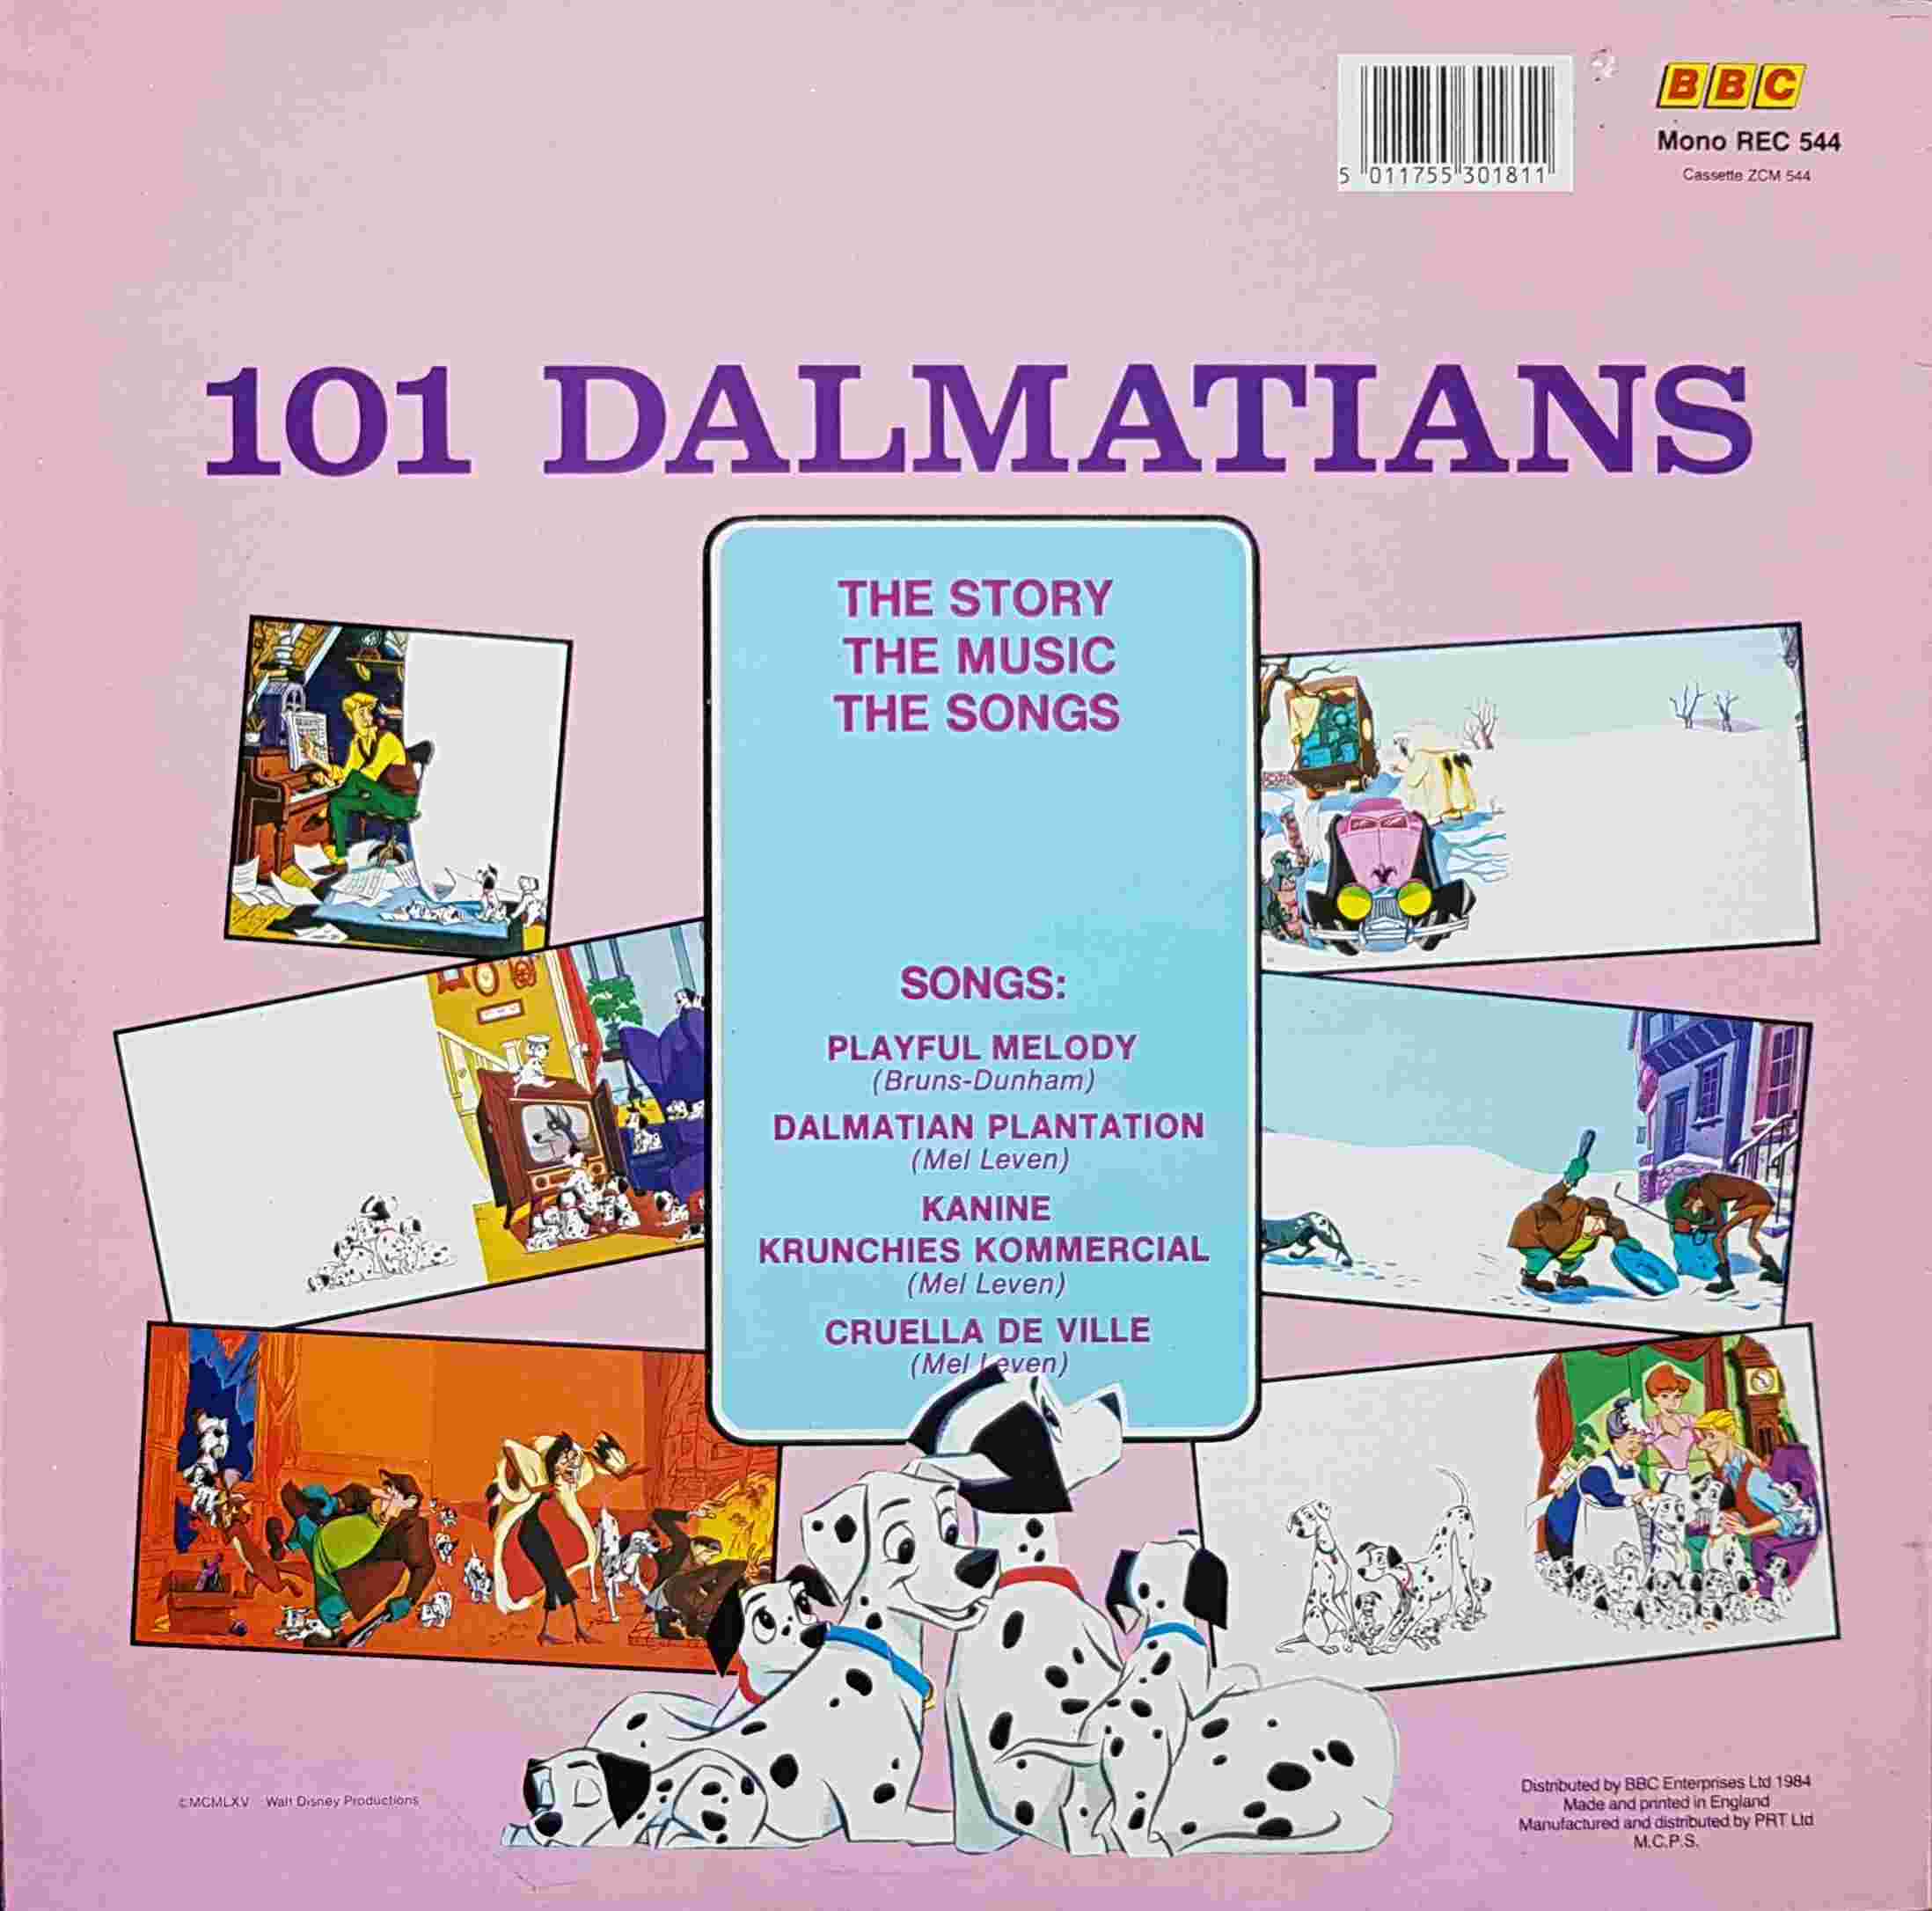 Picture of REC 544 101 dalmatians by artist Bruns / Dunham / Mel Leven from the BBC records and Tapes library